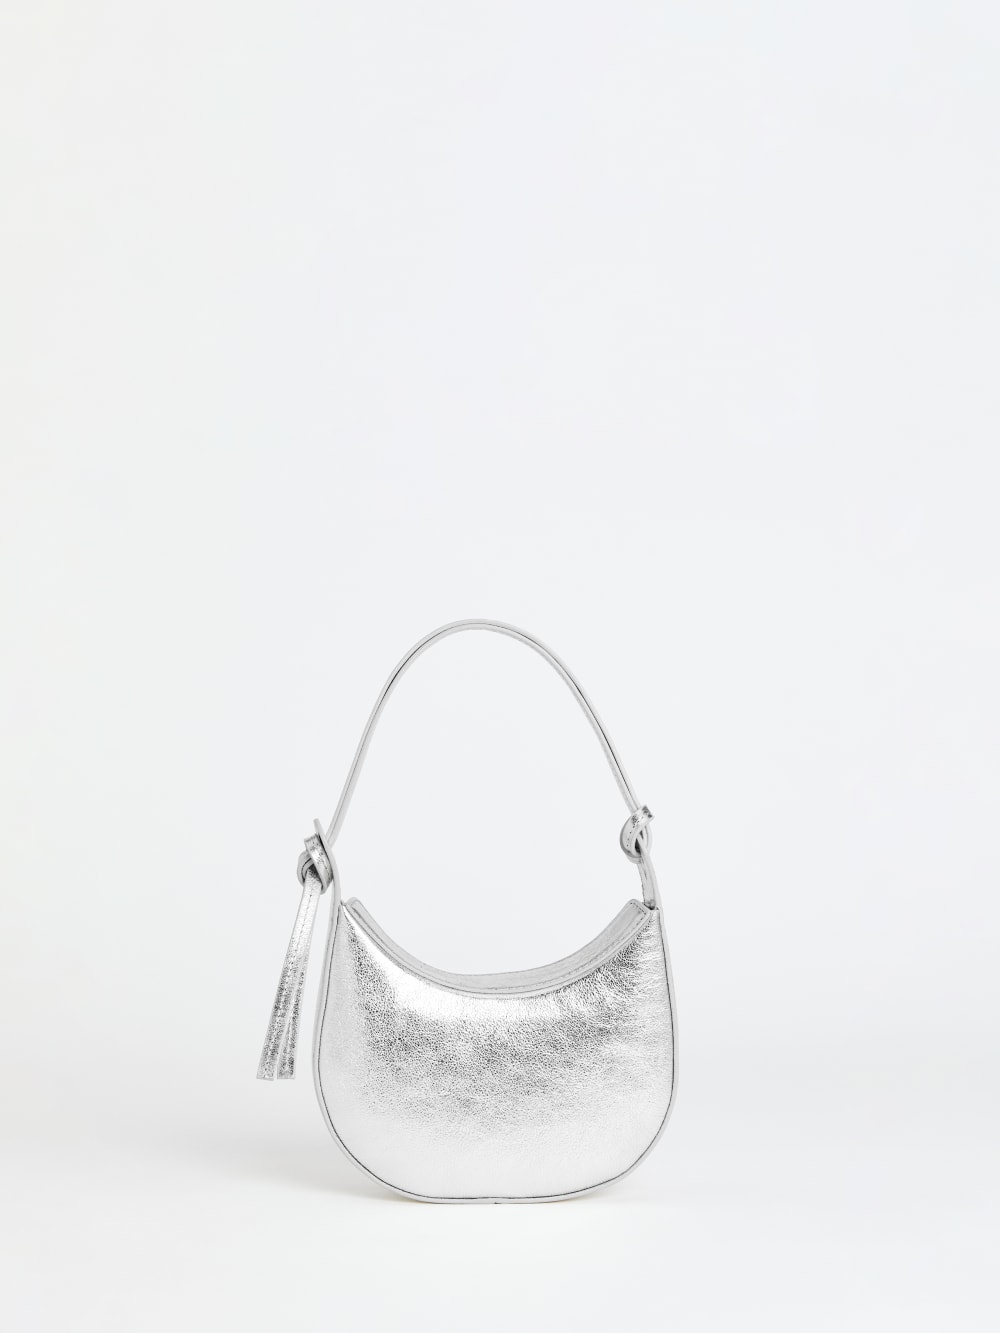 Reformation silver Crescent shaped leather shoulder bag with a decorative tie detail, magnetic closure, and interior pockets.